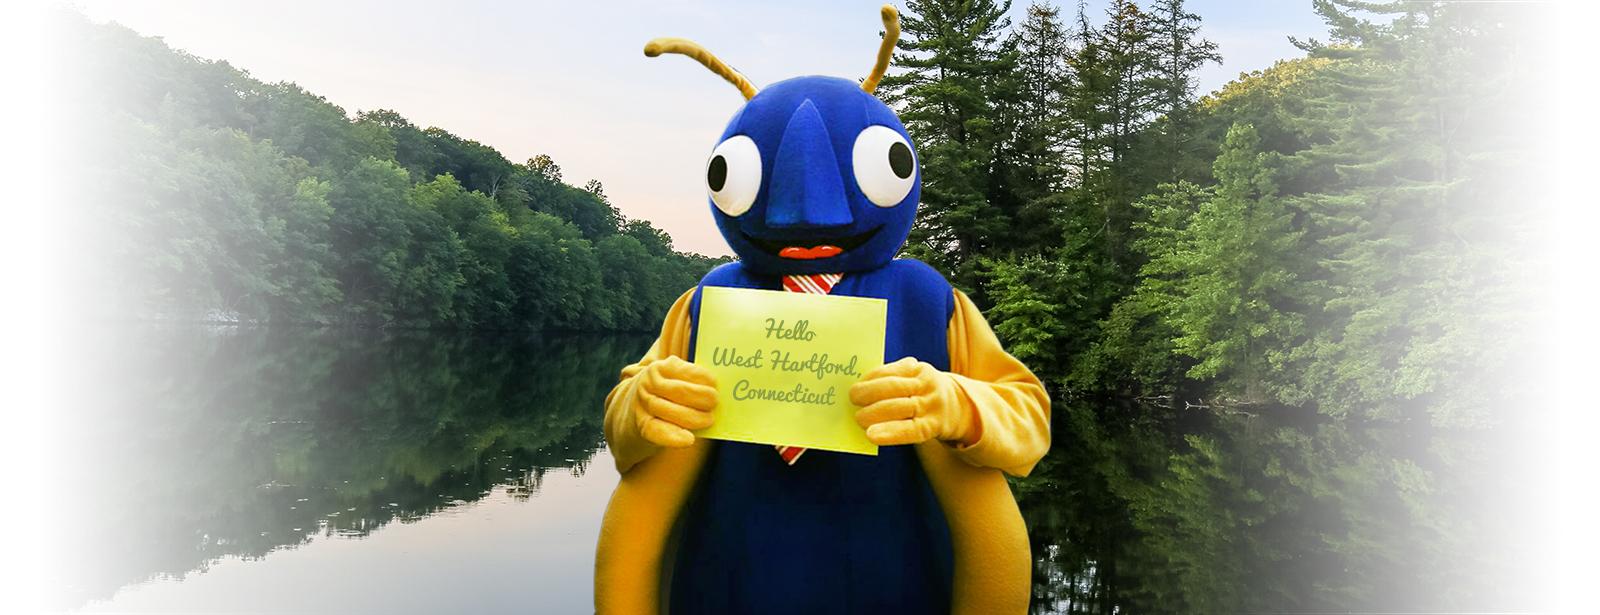 Person in bug costume holding sign that says Hello West Hartford Connecticut